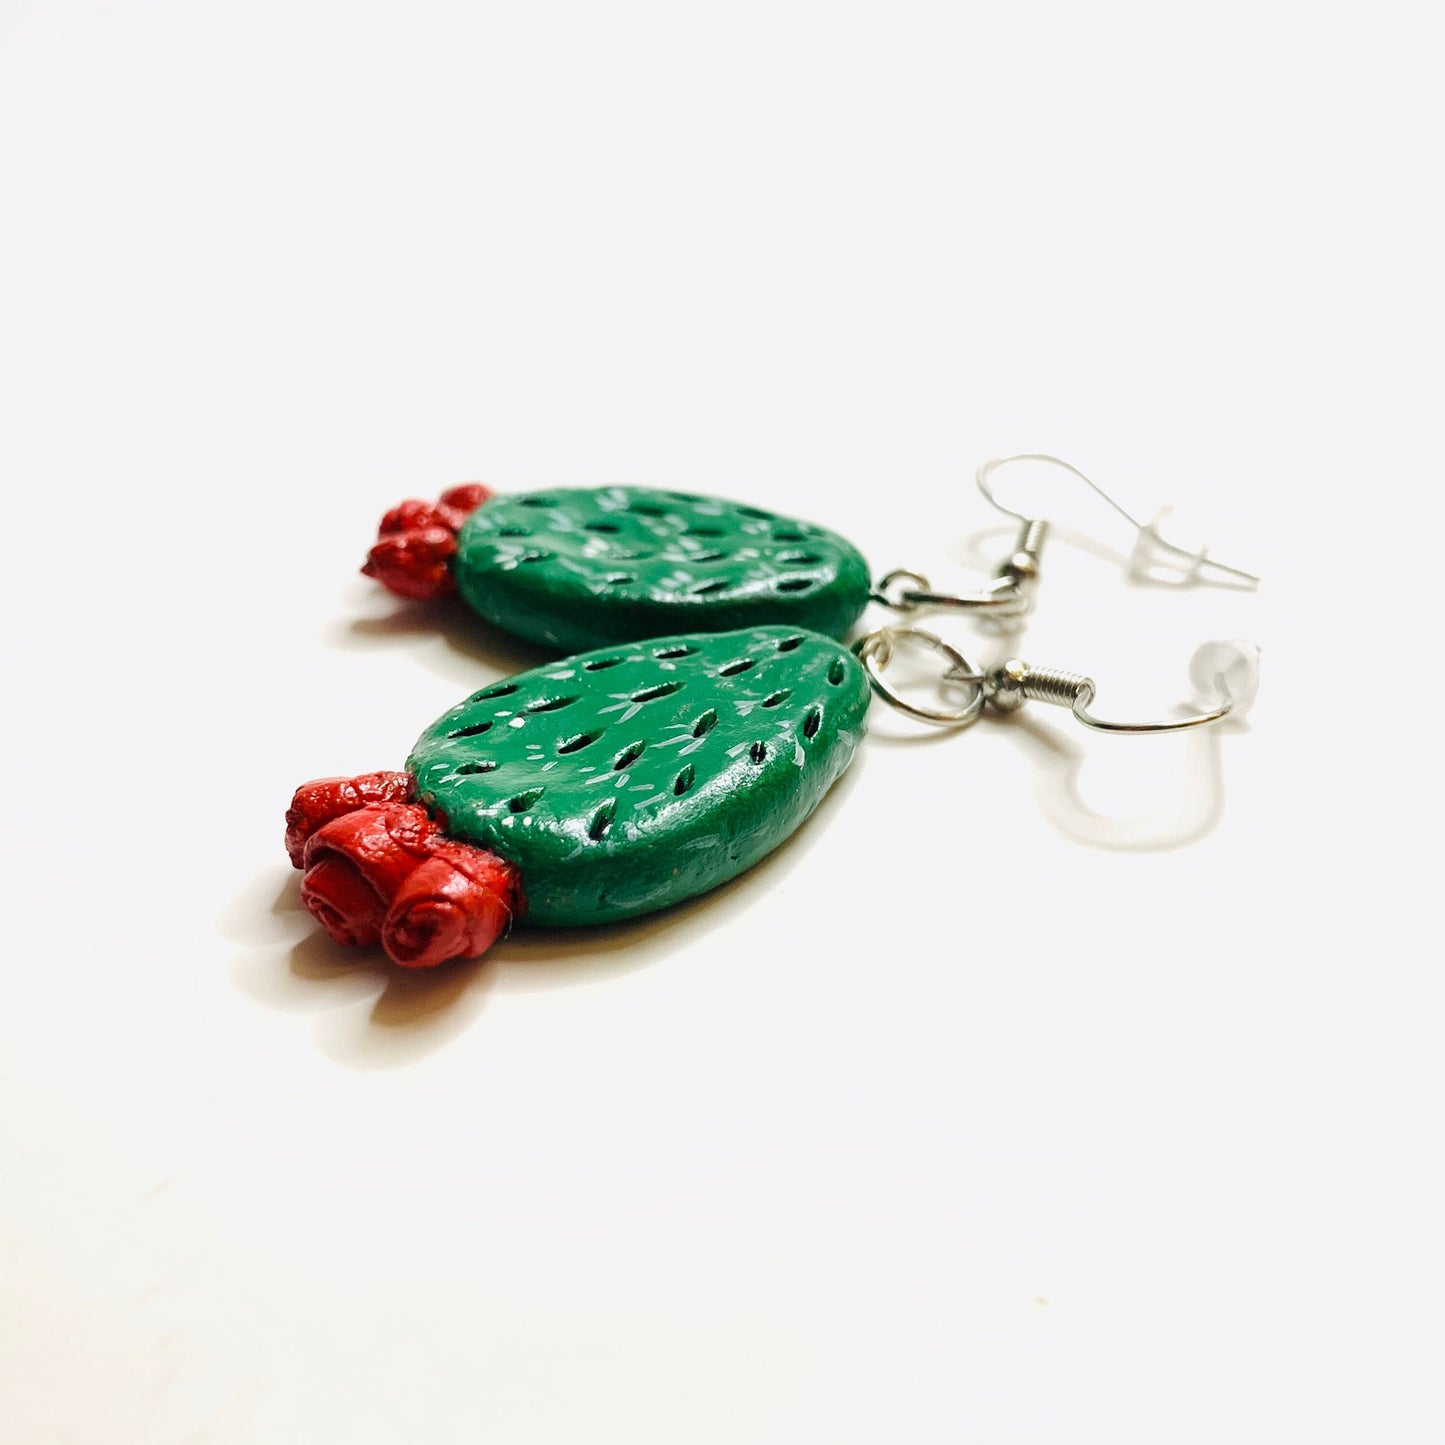 Glamorous Carved Cactus Earrings Clay Jewelry Mexico Red Flowers Folk ArtWear Fashion Summer Girls Women Gift Aretes Nopales Mujer Claywelry